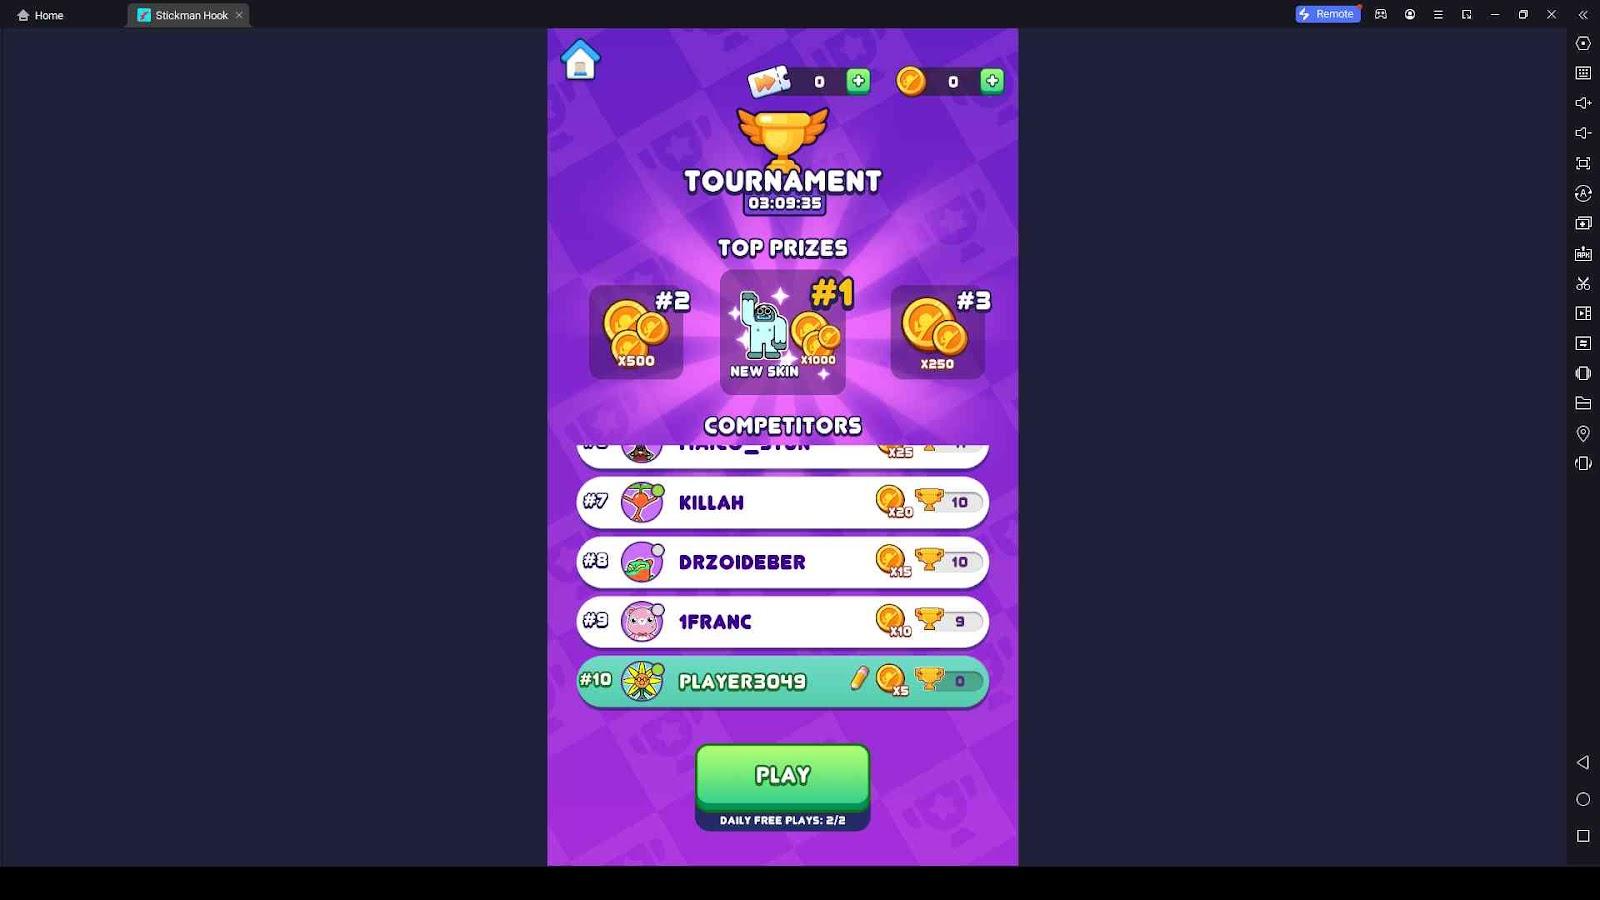 Play Tournaments for Top Prizes